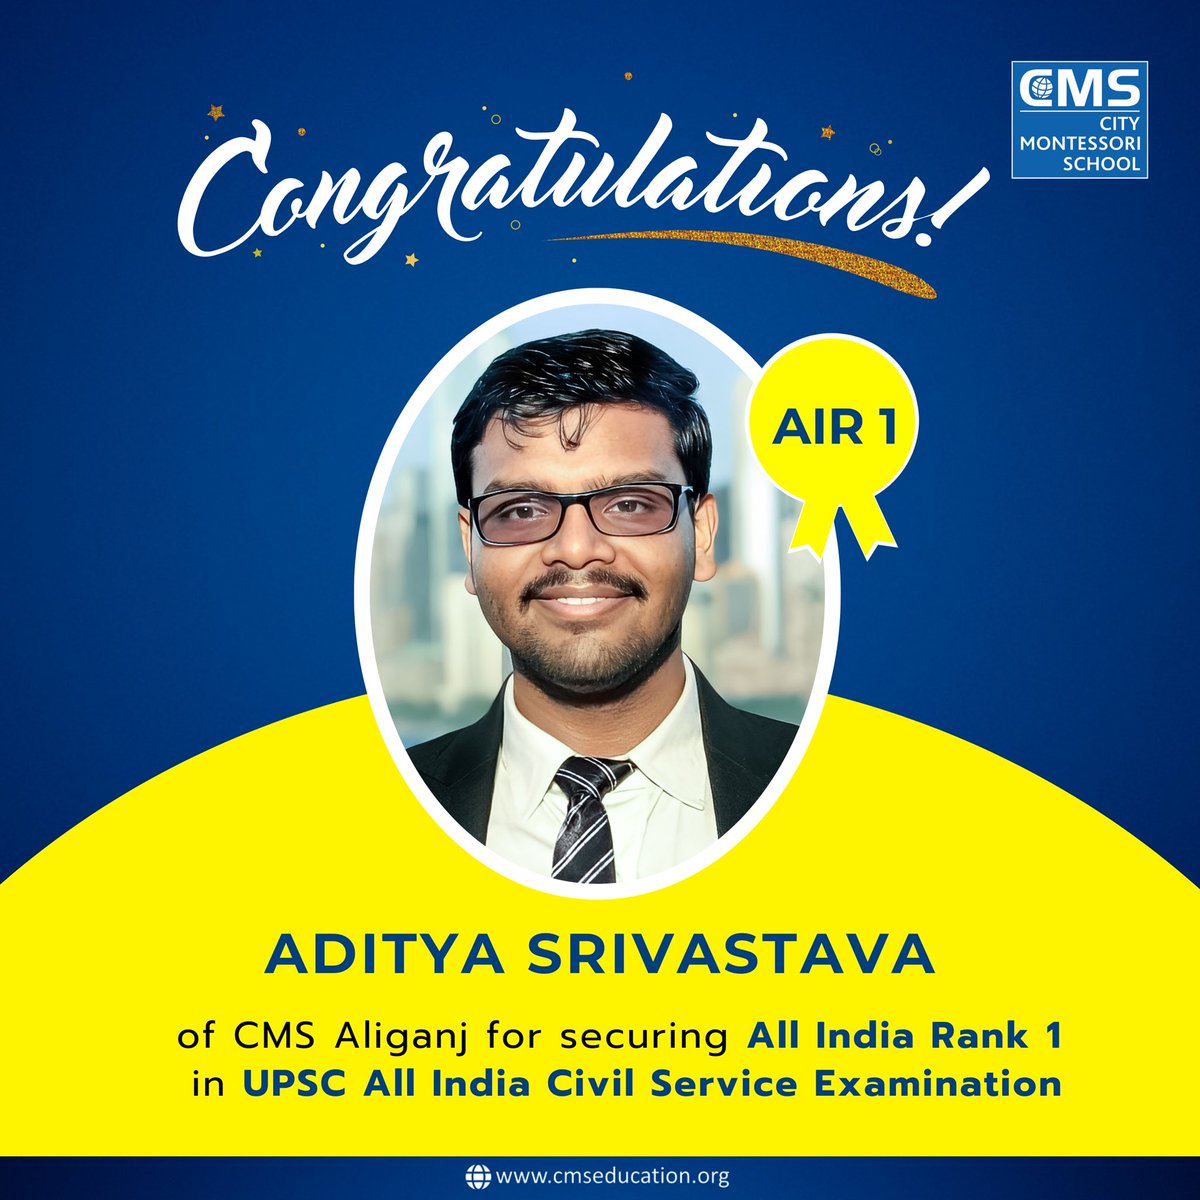 We're ecstatic to announce that Aditya Srivastava, our alumnus of CMS Aliganj Campus, has topped the country in the UPSC Civil Services Exam, securing All India Rank 1! 🎉

#UPSC #CivilServices #ProudAlumni